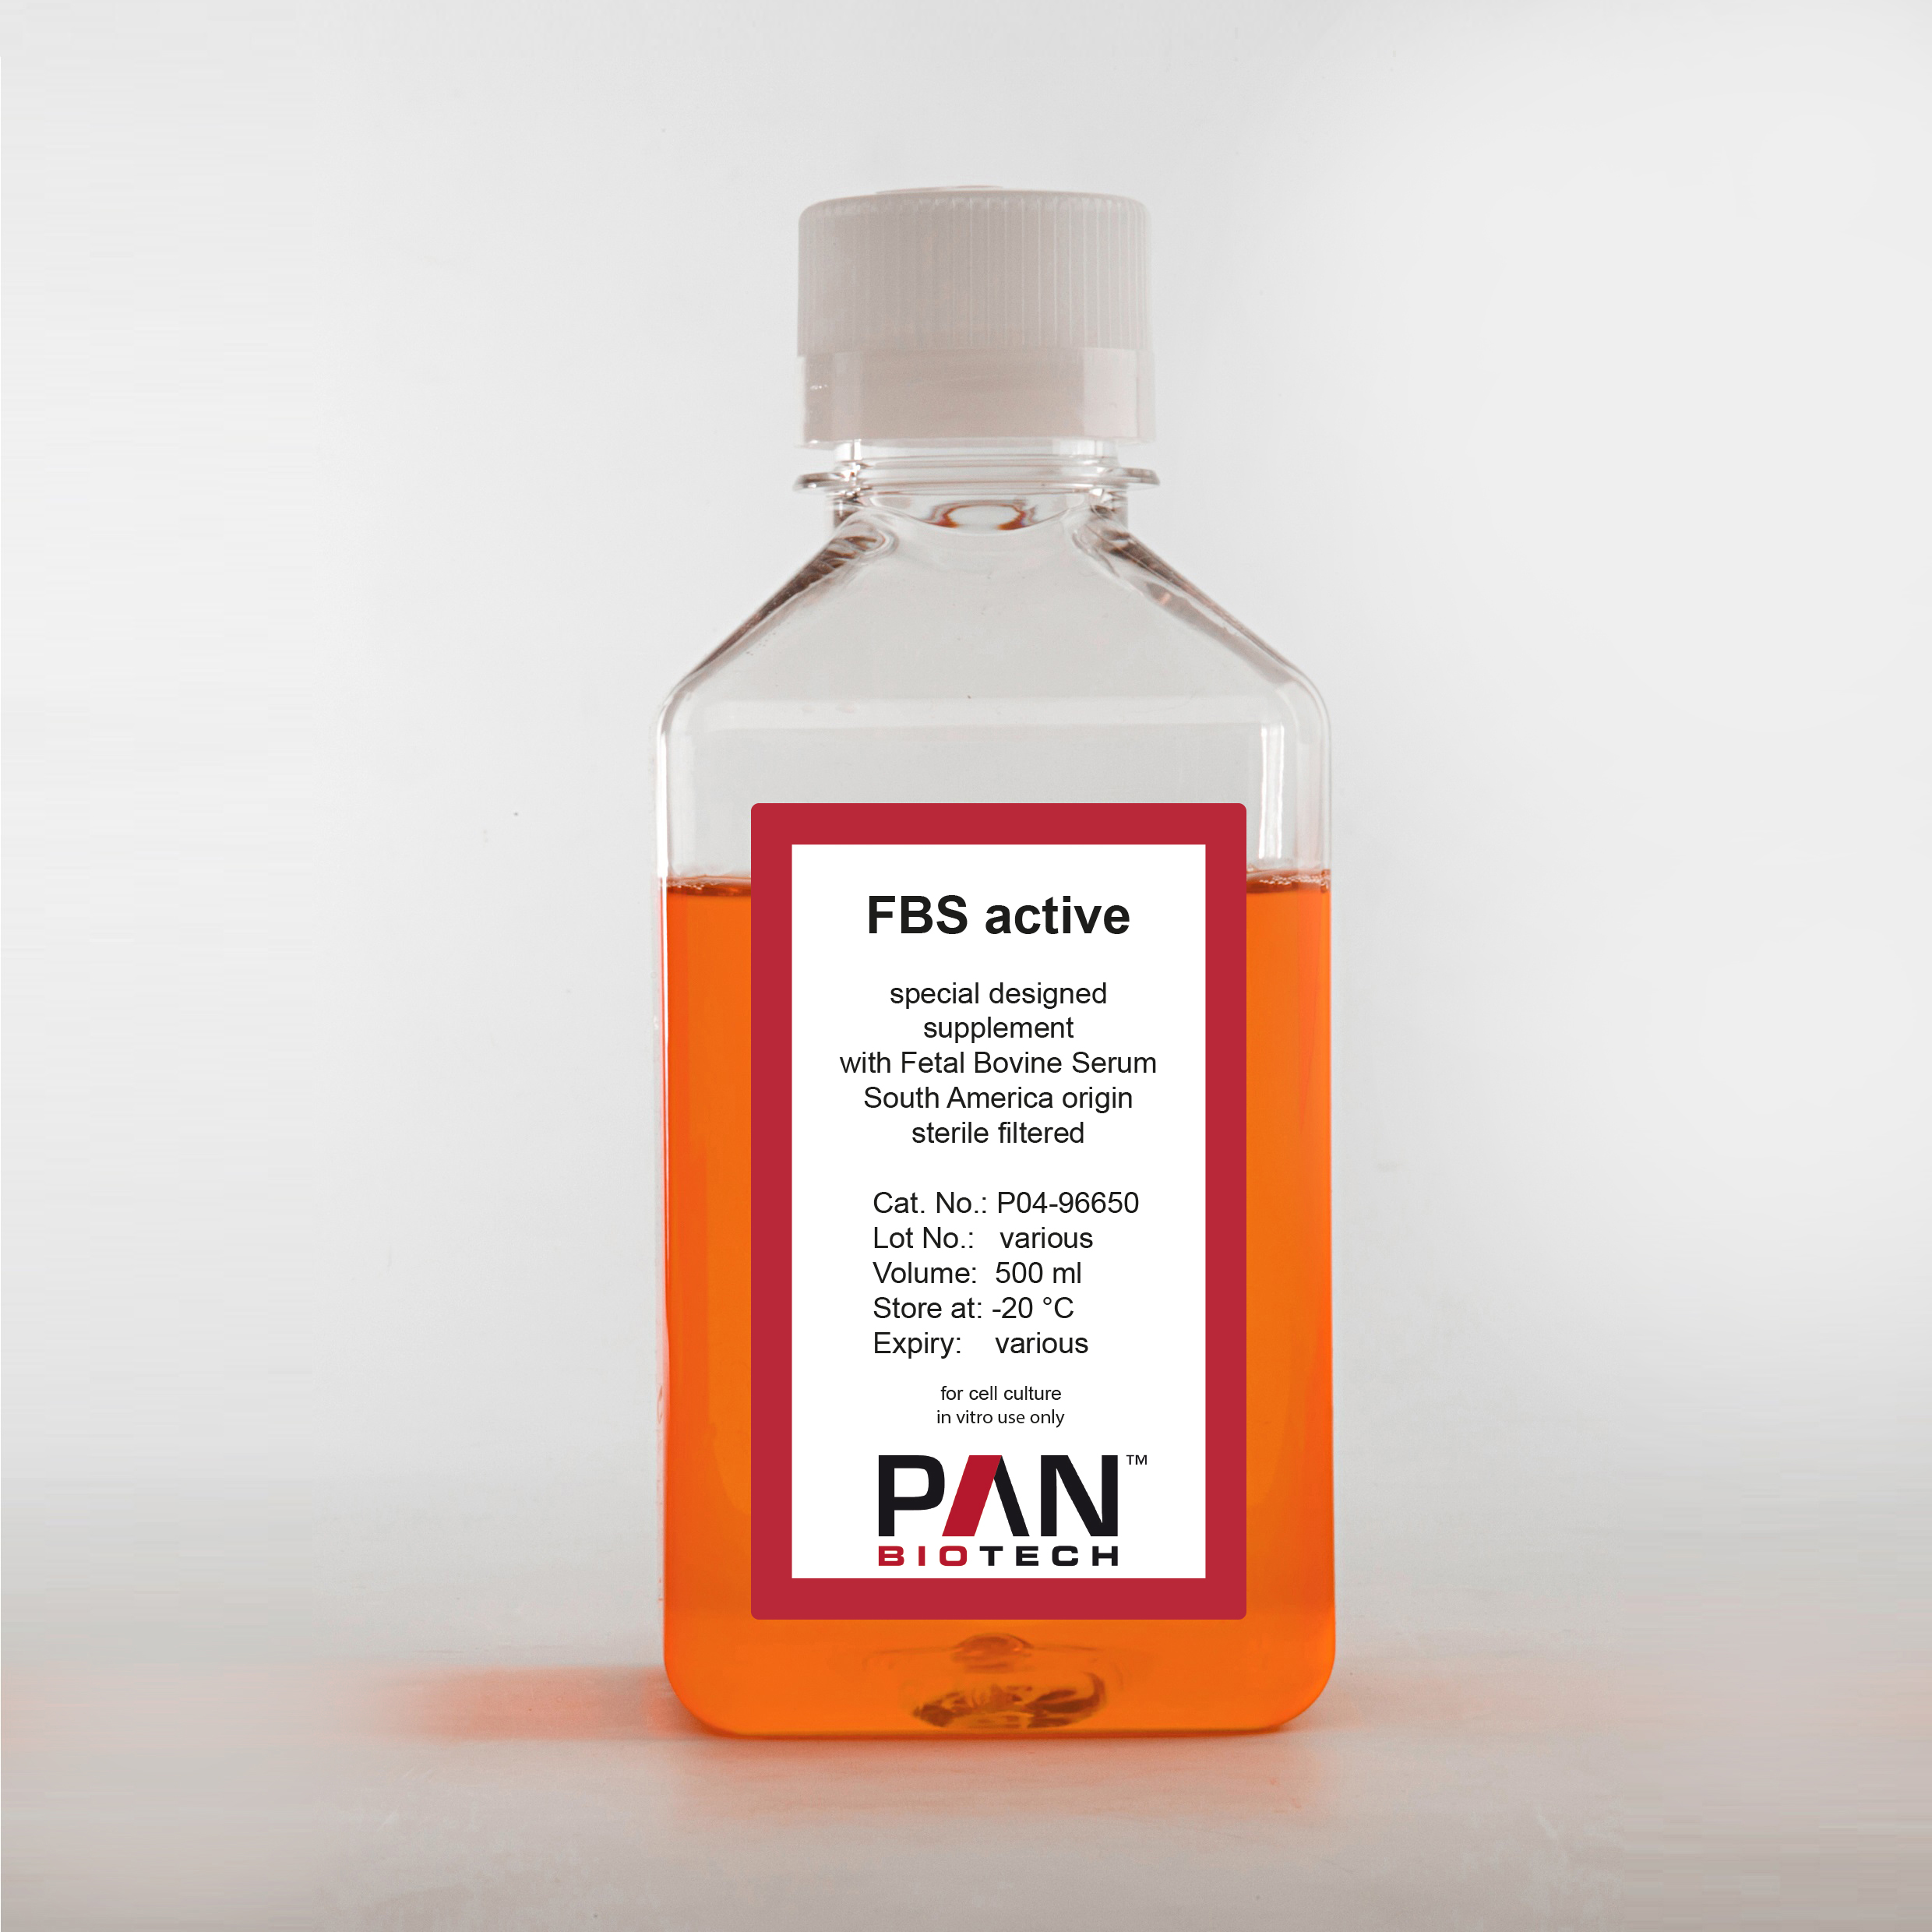 FBS active, special designed supplement with Fetal Bovine Serum, South America origin